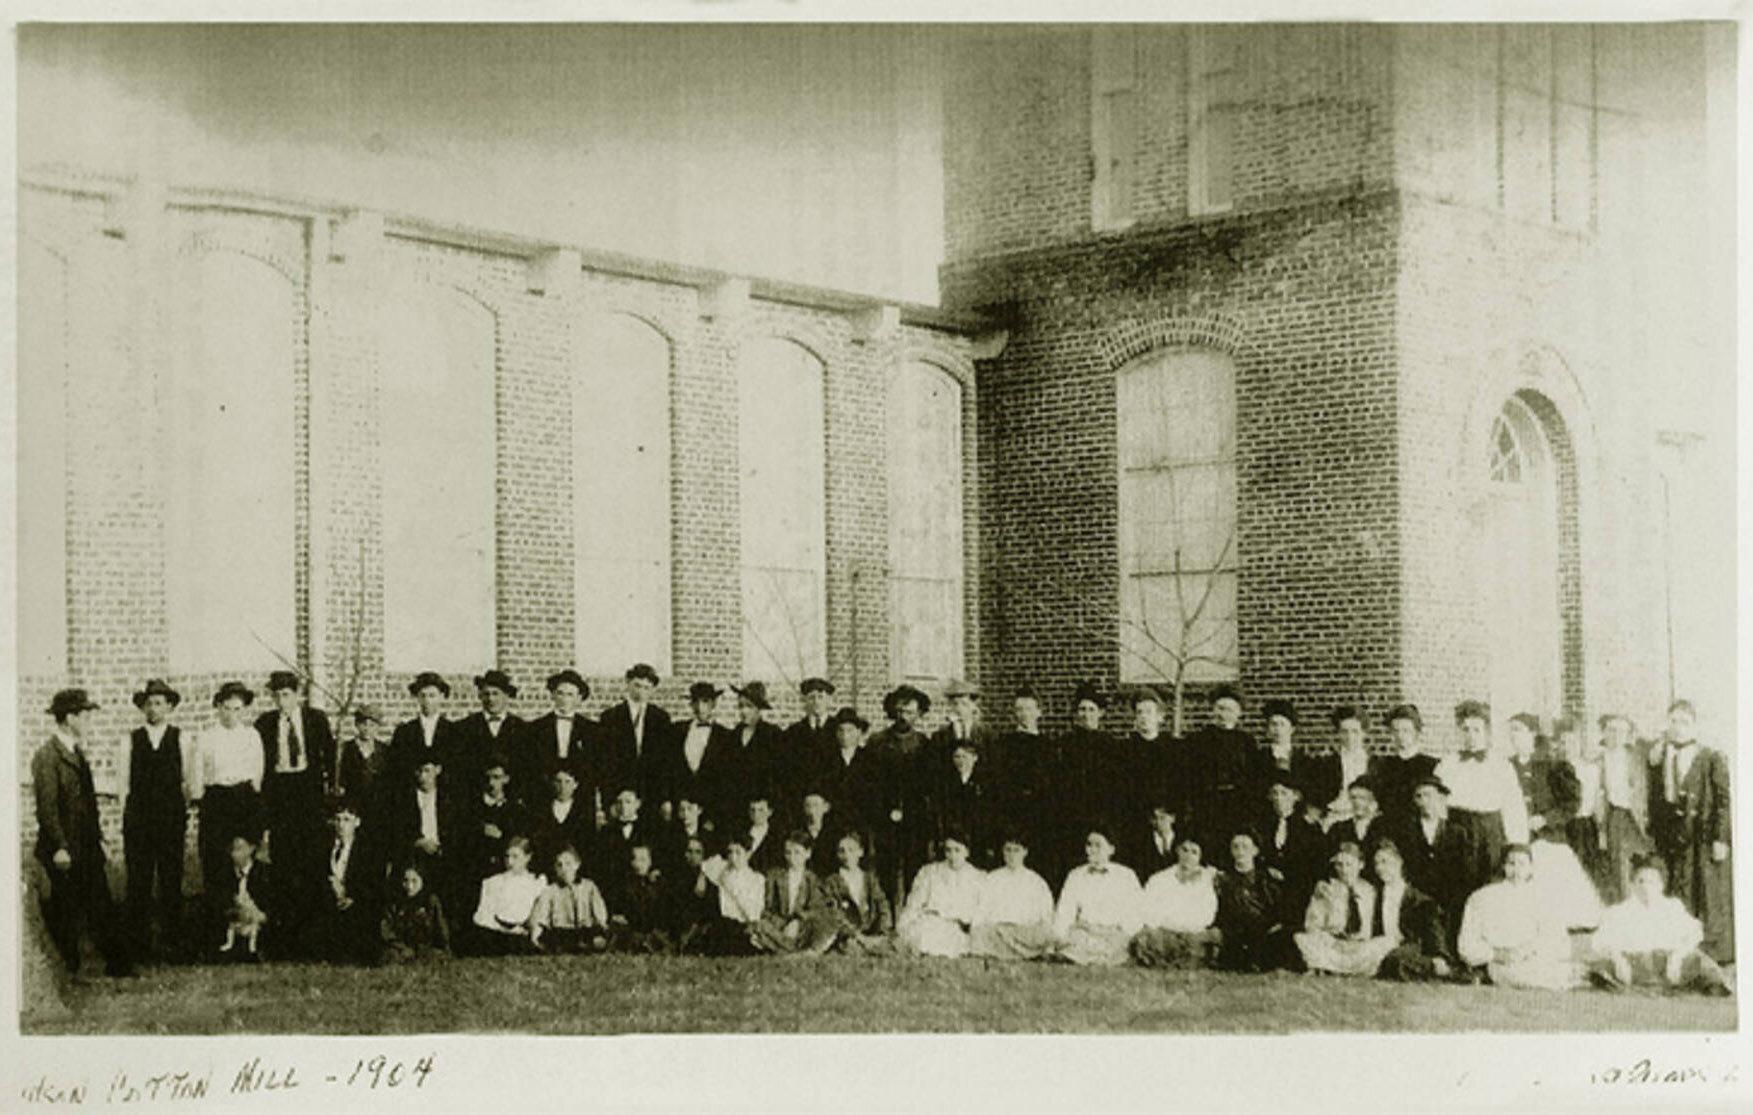 Workers in 1904 at the Hudson Cotton Mill, now home to Sattler Outdura.